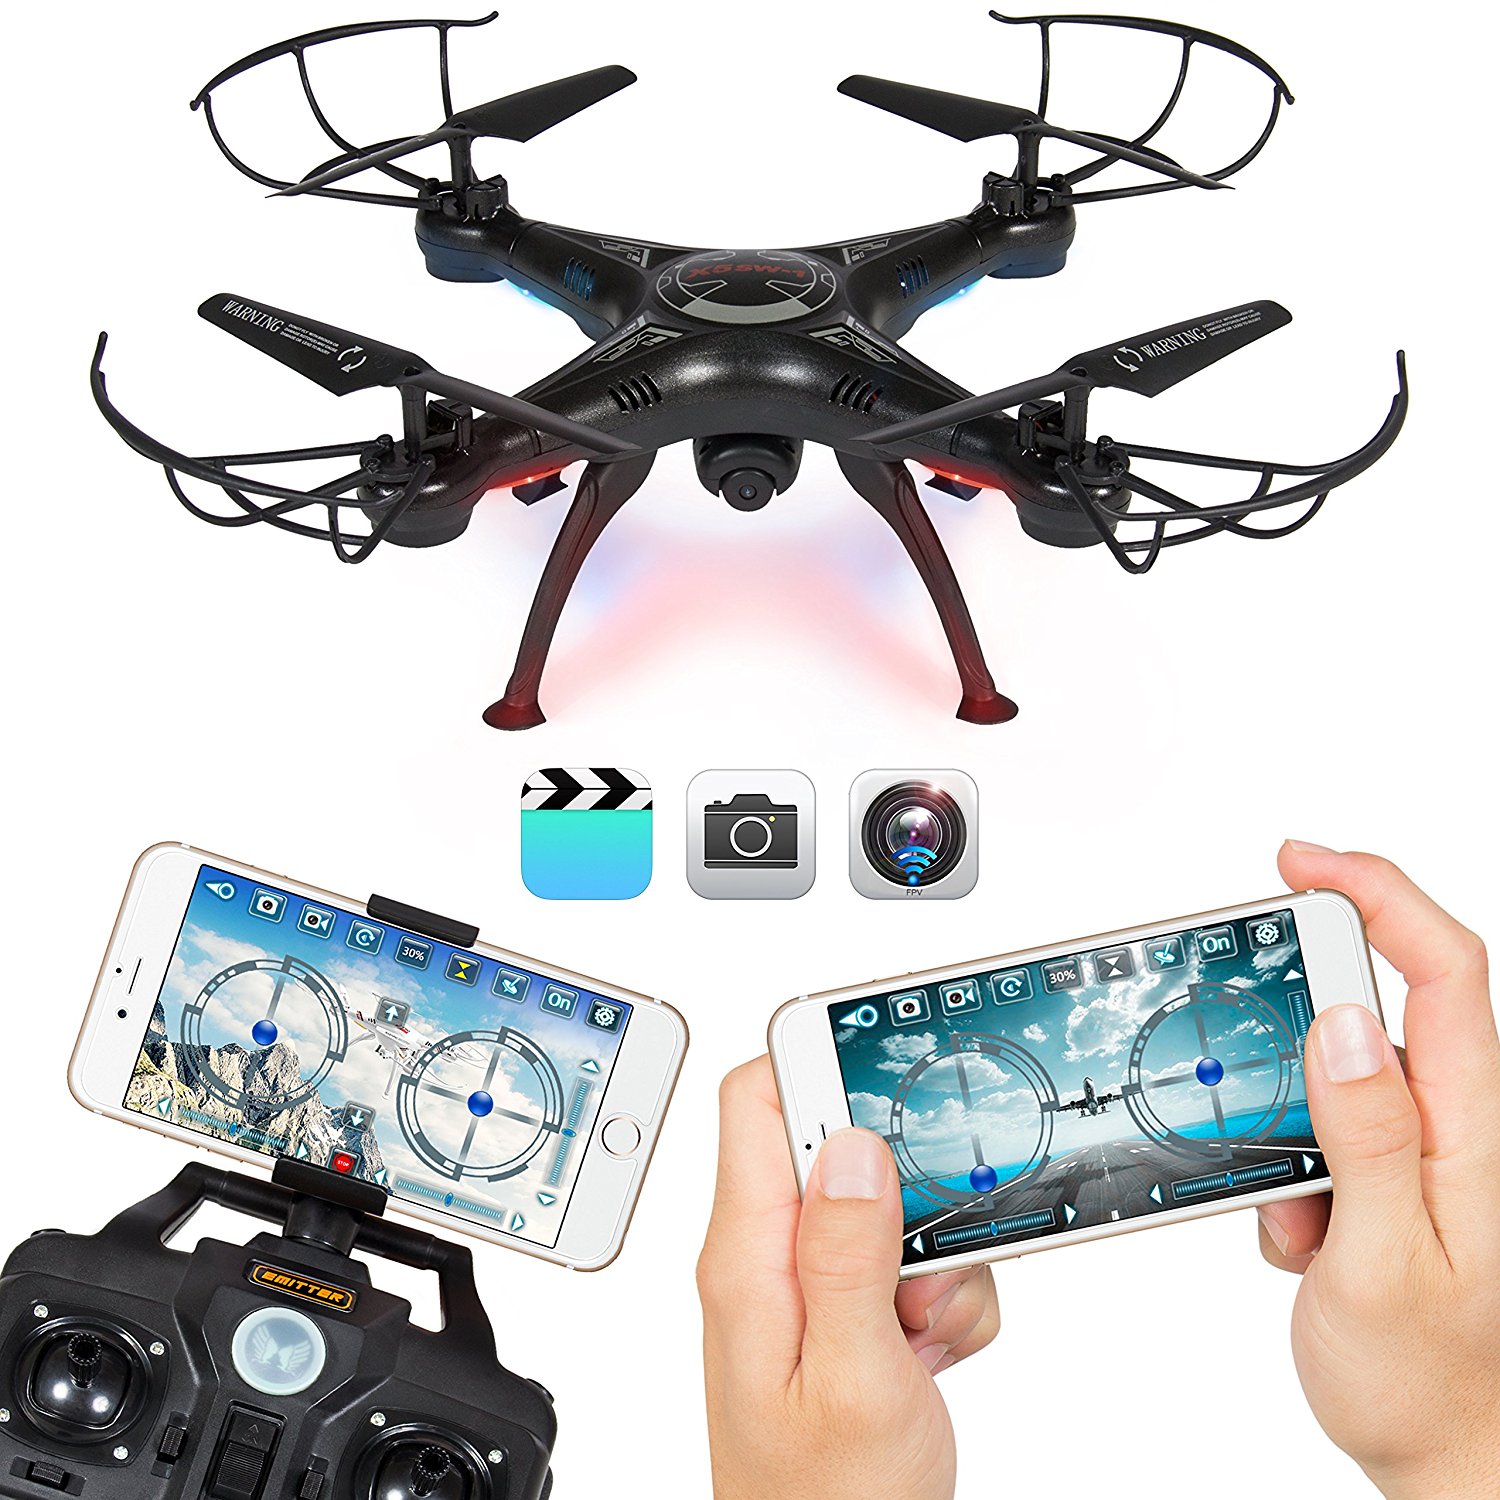 Best Choice Products BCP 4 Channel 6-Axis Gyro Headless Remote Control Quadcopter FPV RC Drone With Wifi Camera For Real Time Video, 2 Control Modes